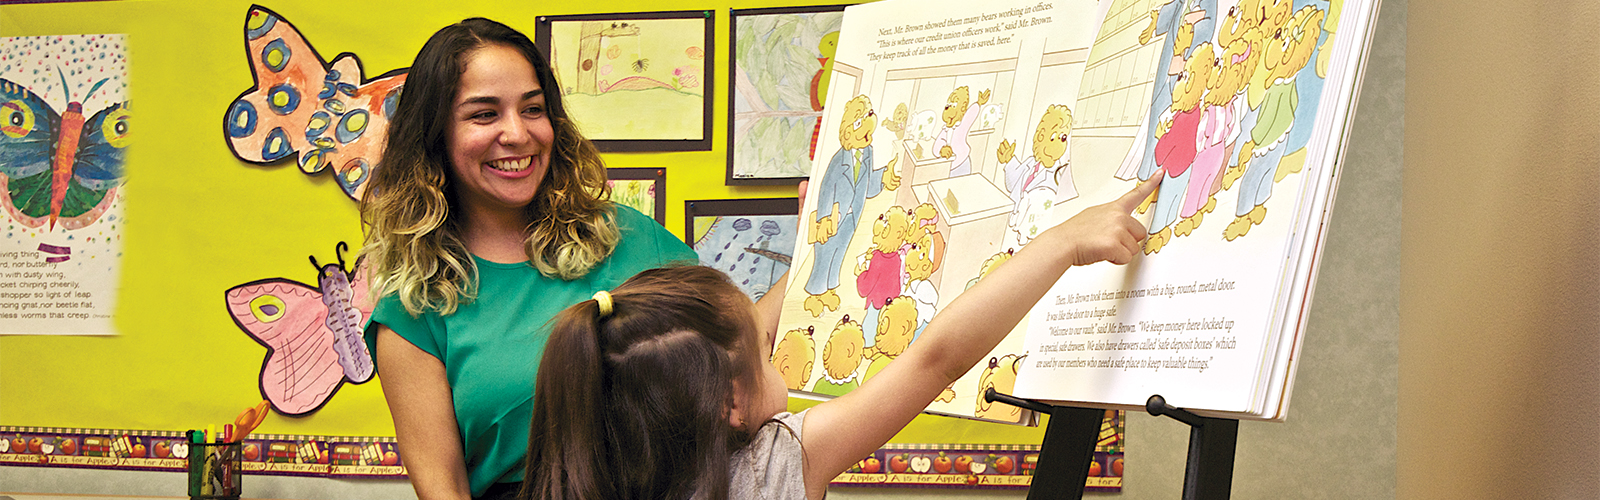 Teaching Financial Literacy with the Berenstain Bears Financial Literacy Program